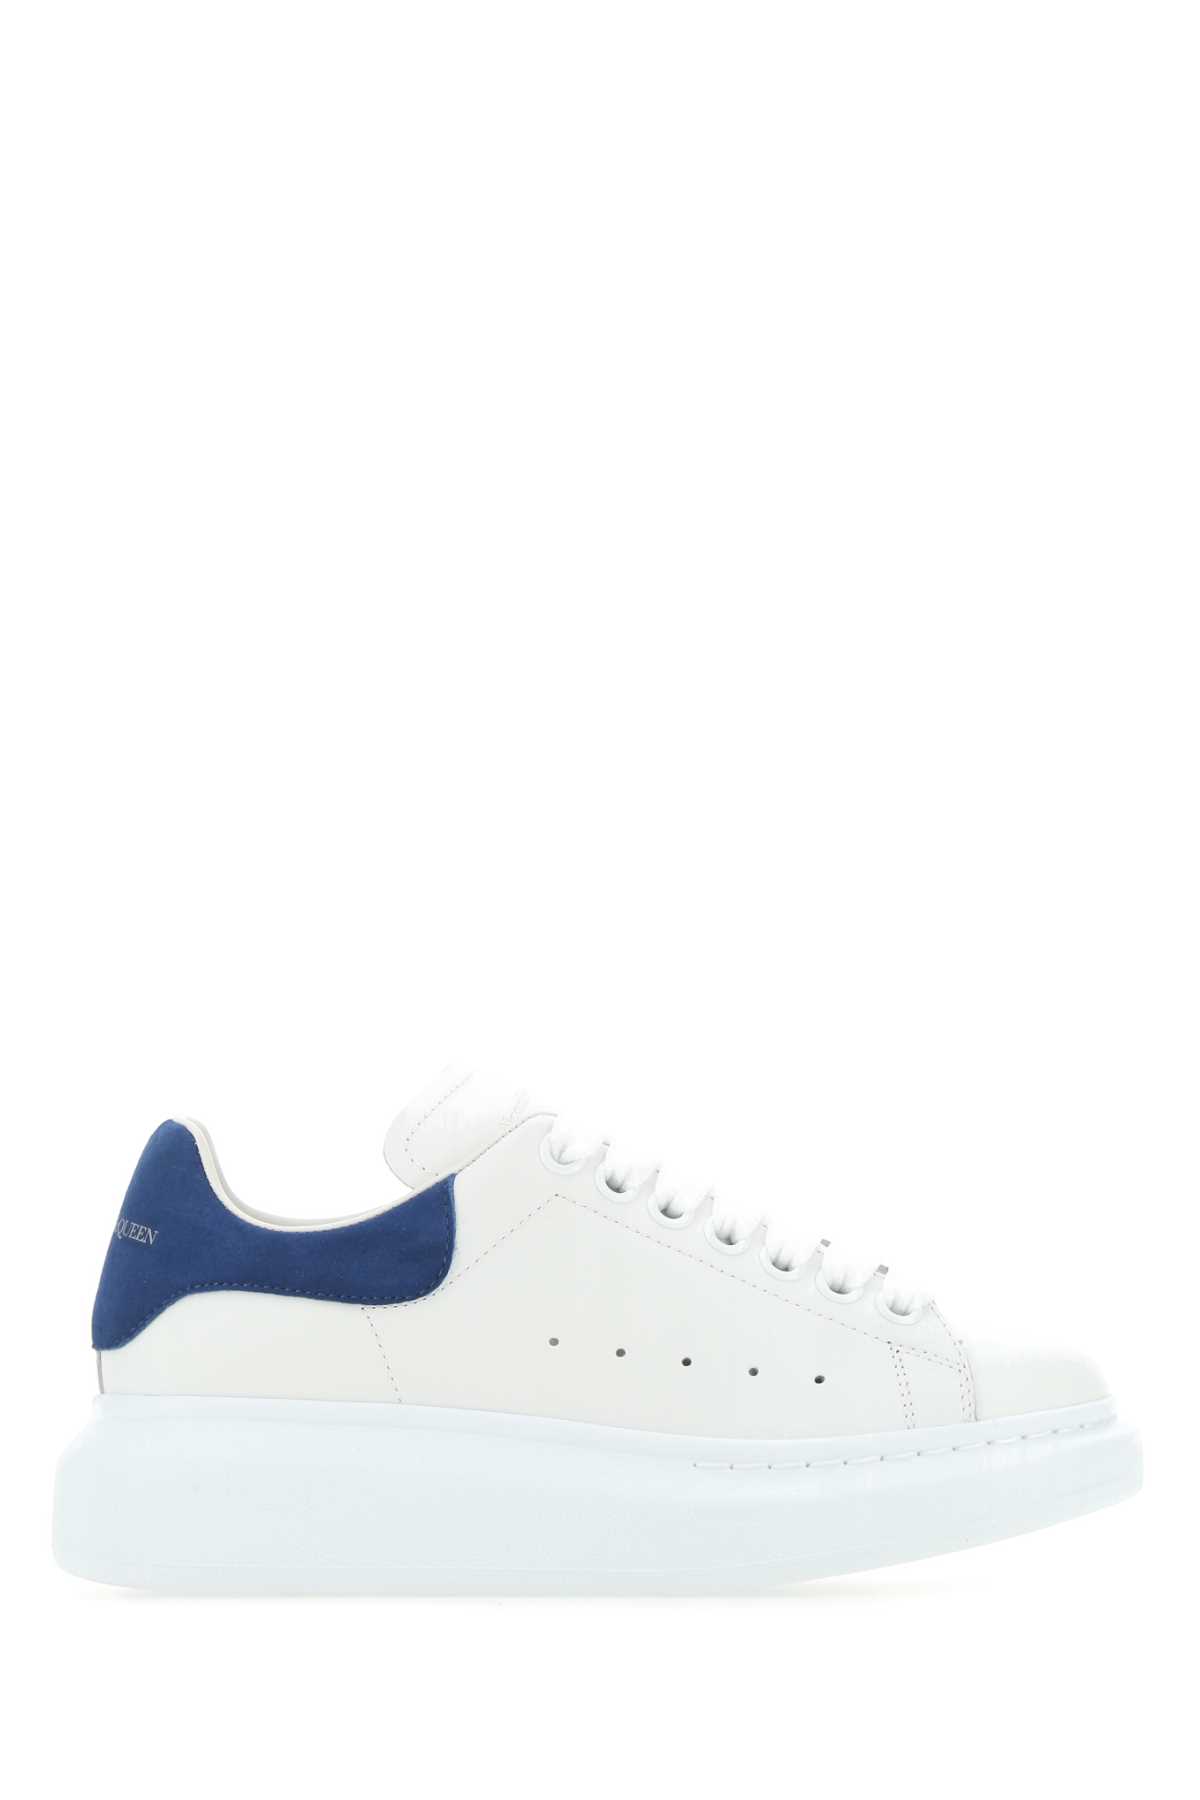 Shop Alexander Mcqueen White Leather Sneakers With Blue Suede Heel In 9086